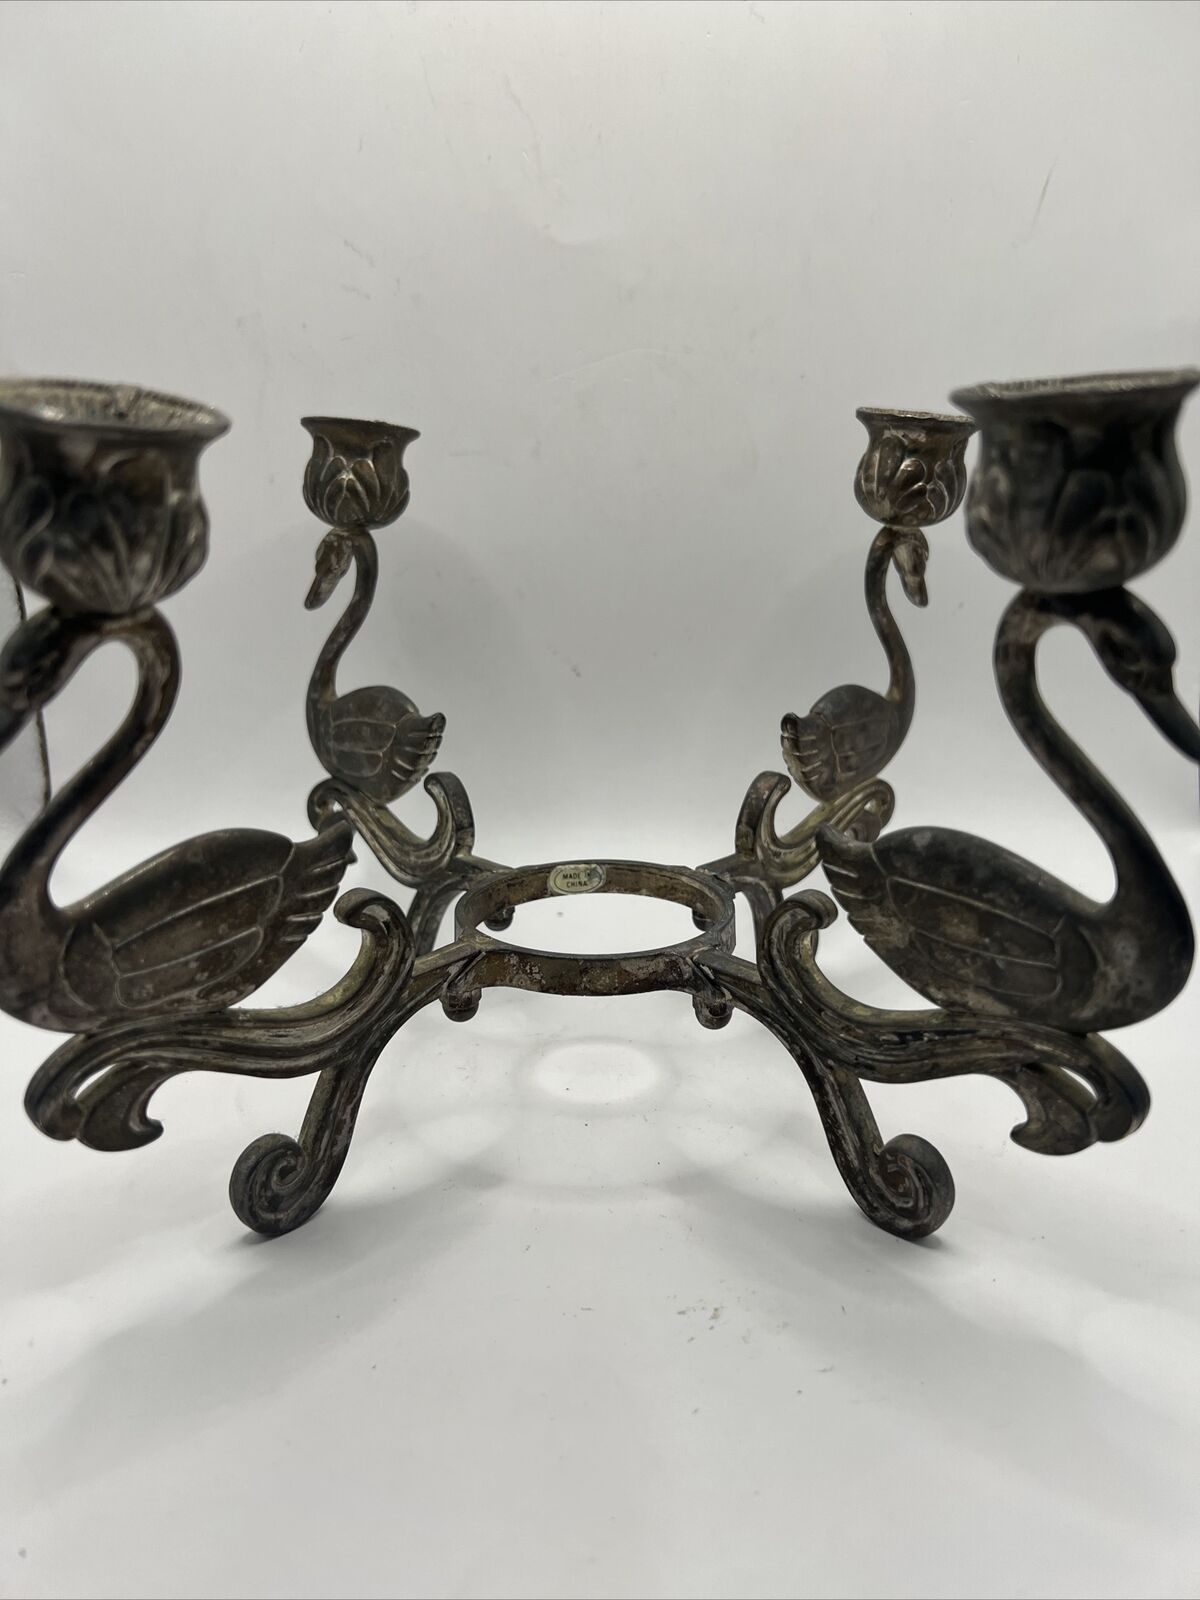 Unique Vintage Swan Silver plated Candelabra Decor Table Decor 6.5” Tall 11” Wid